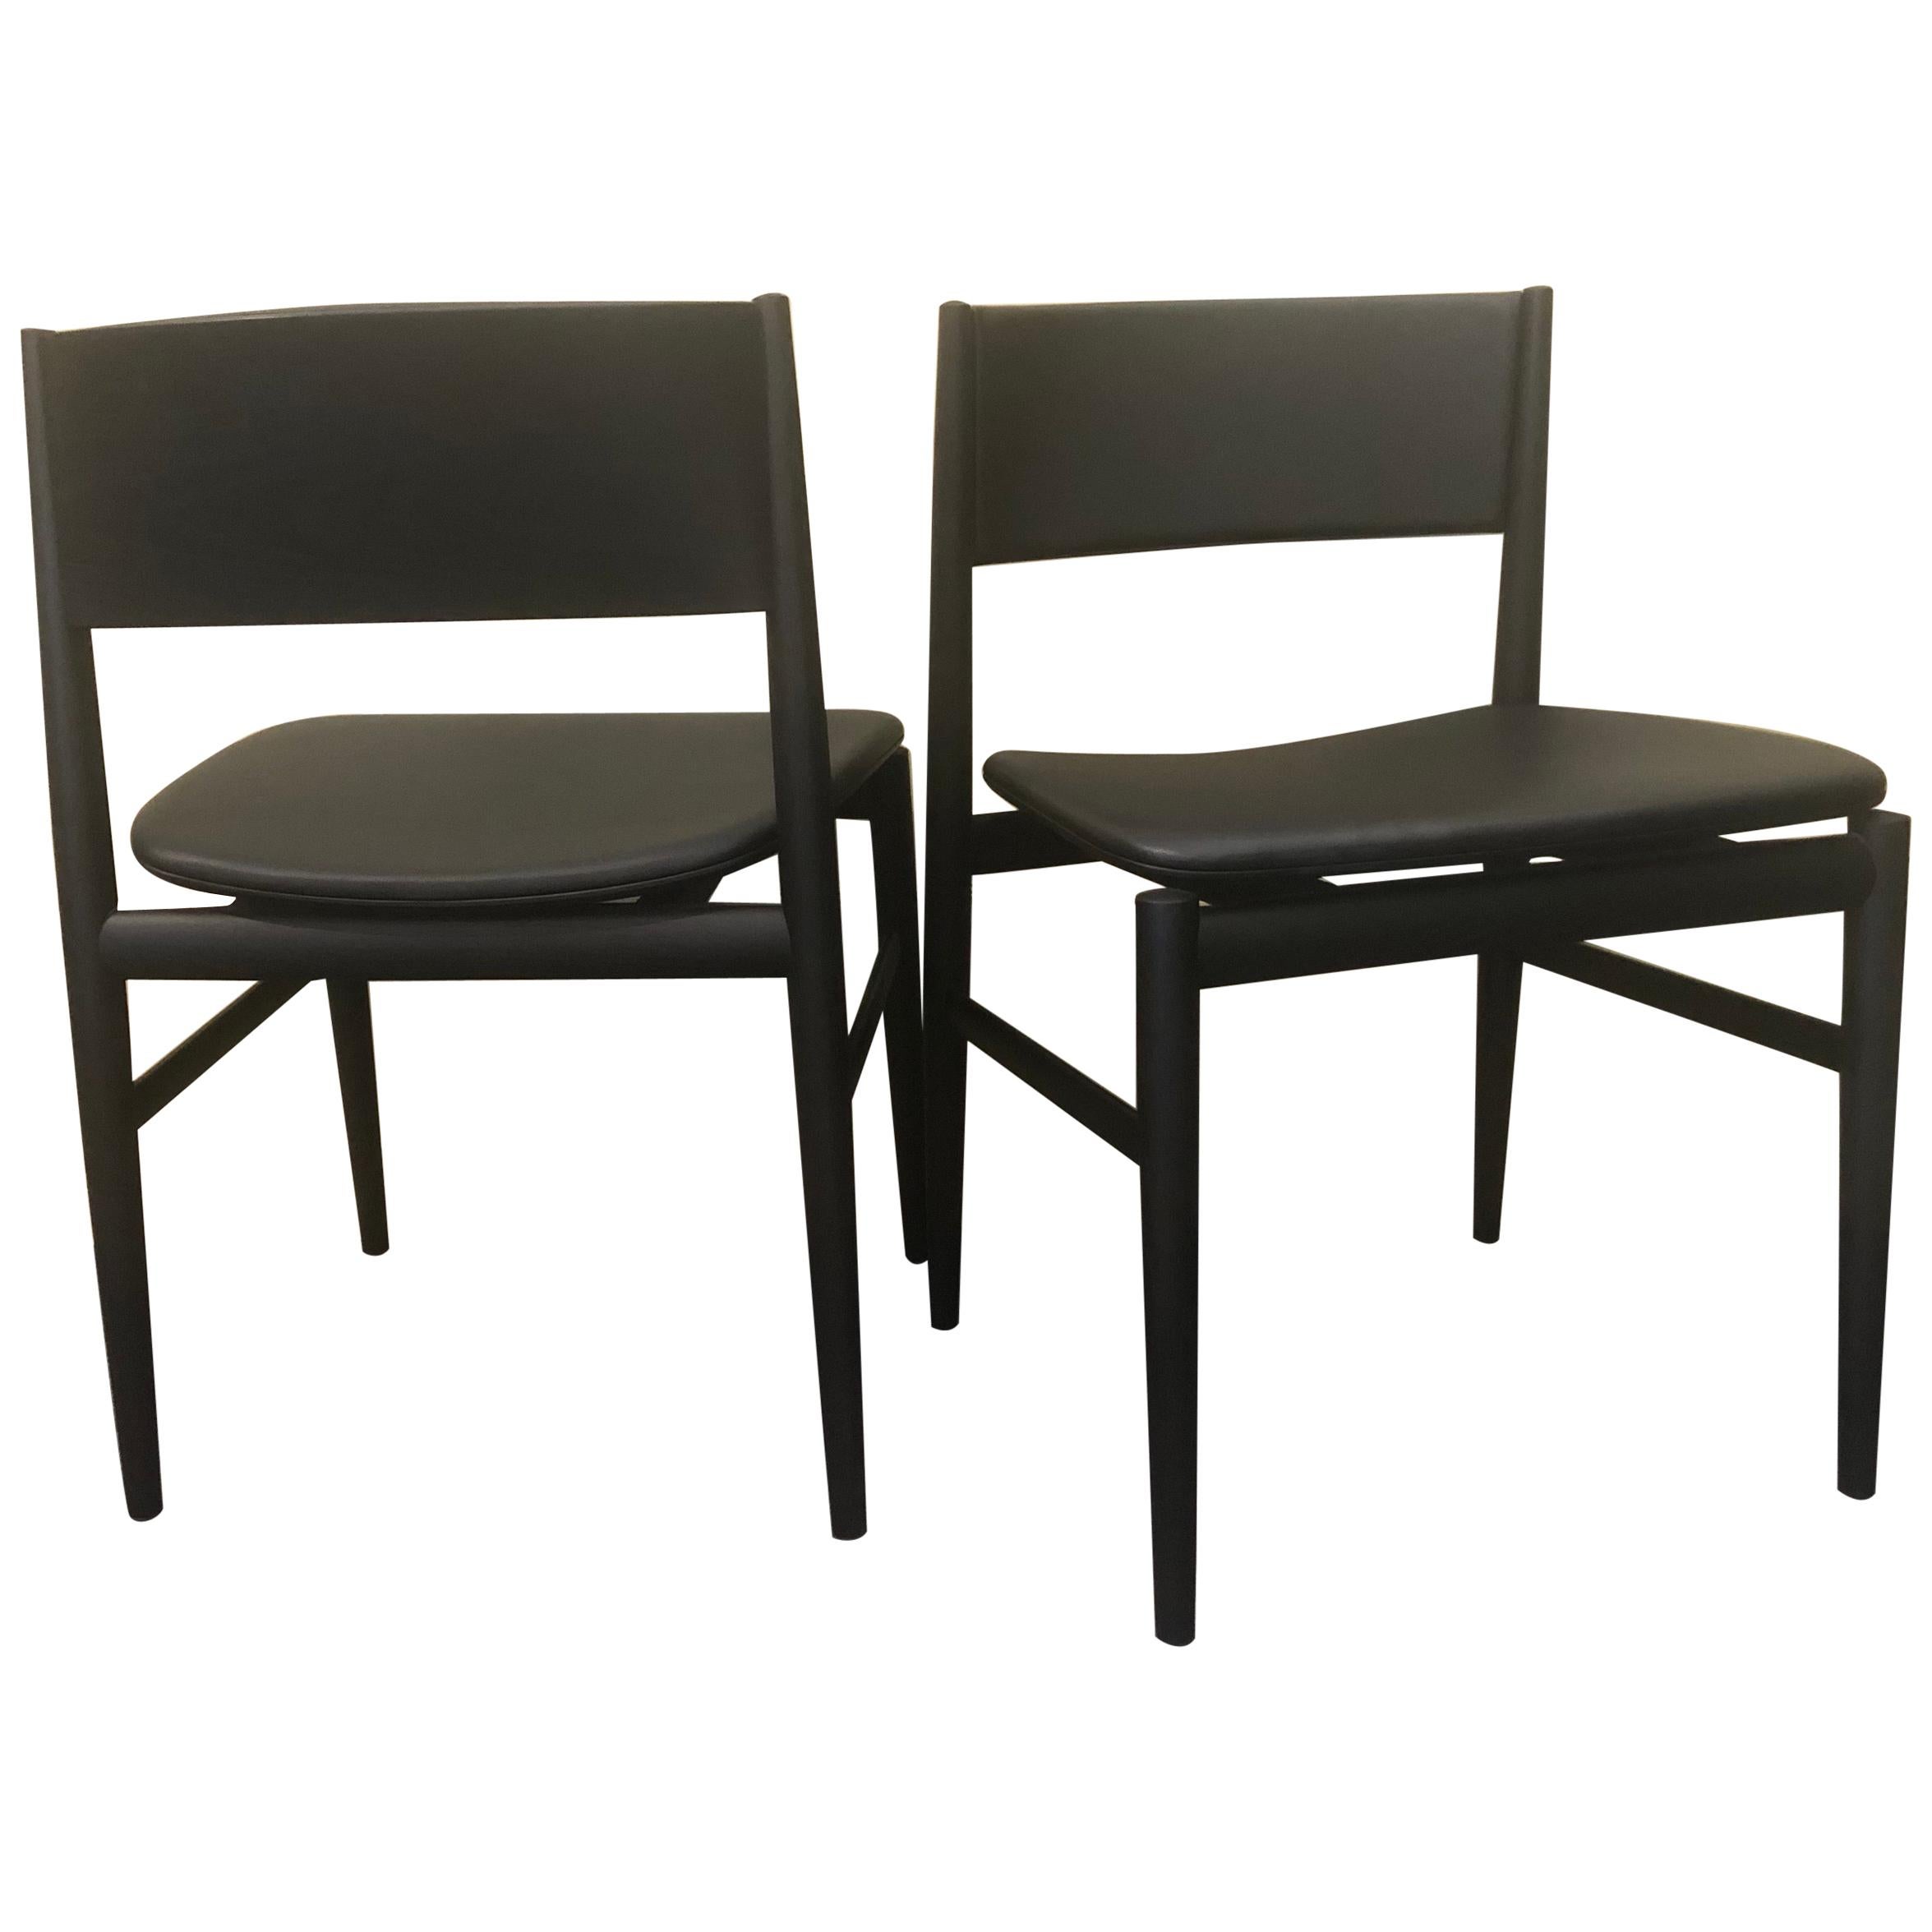 Pair of Italian "Neve" Armchairs in Black Ash by Piero Lissoni for Porro